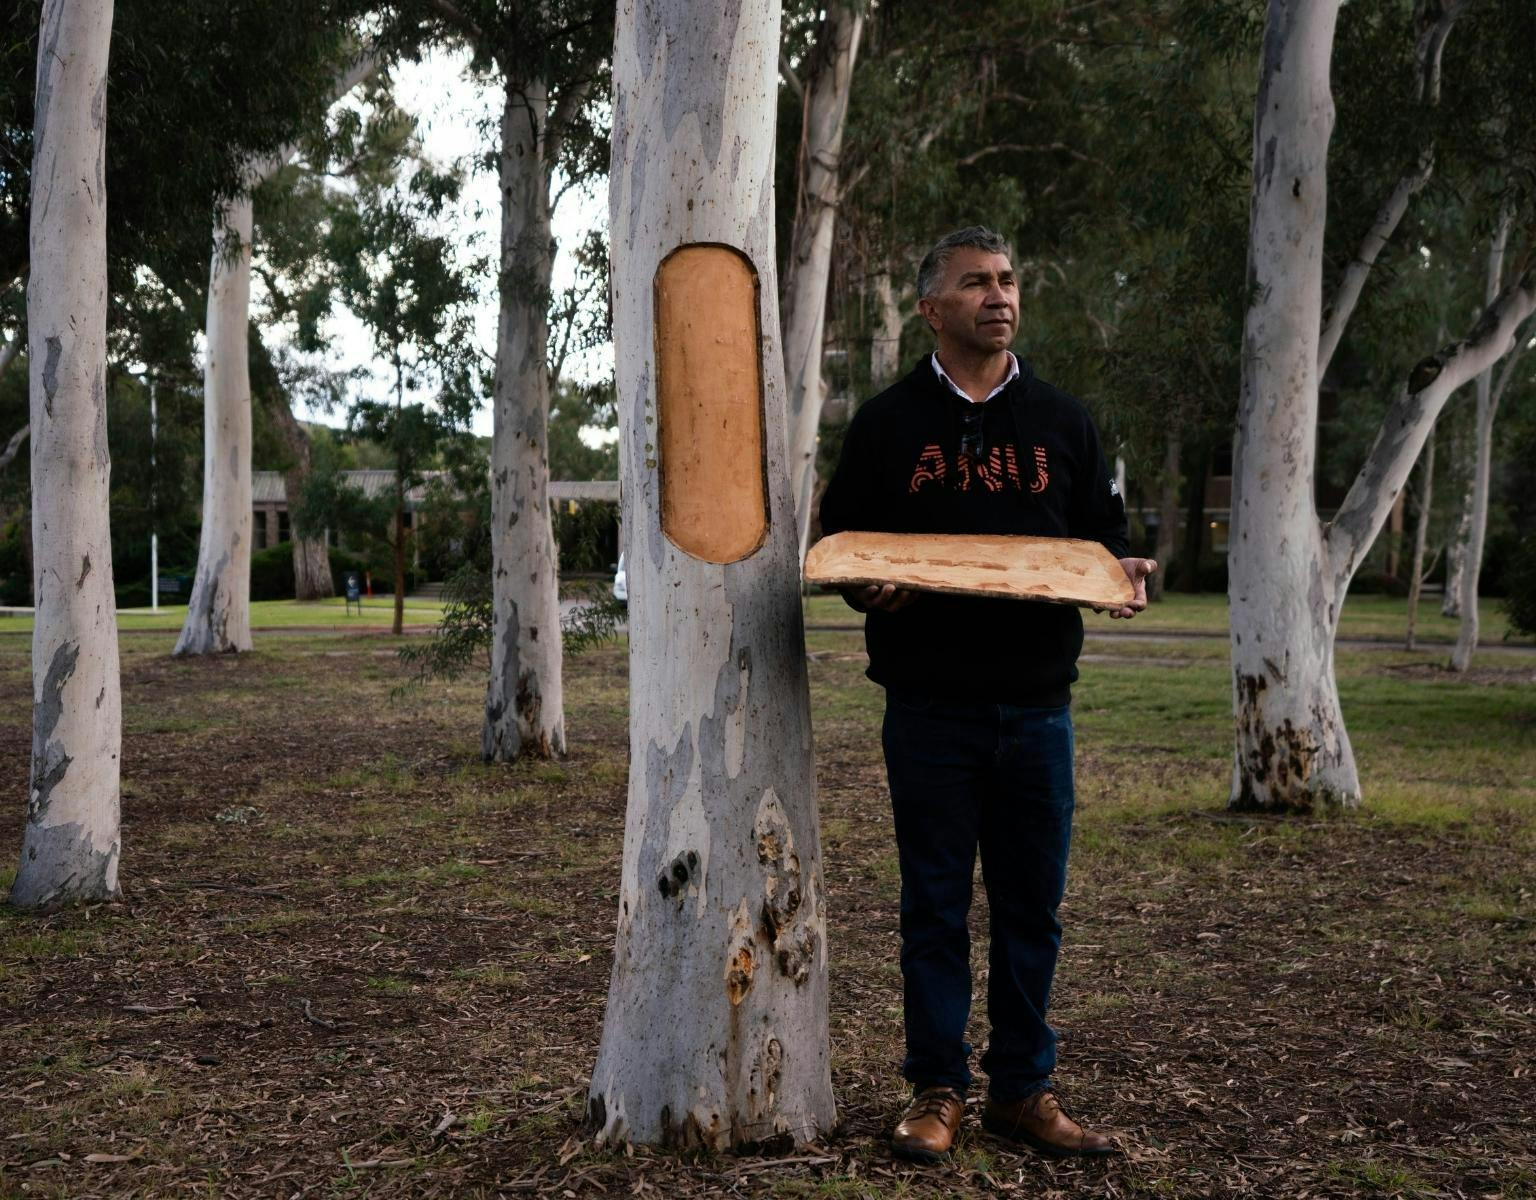 Paul Girrawah House, wearing a black jumper with the letters A N U on the front, stands next to a tree holding a piece of bark he has carved out of the tree.